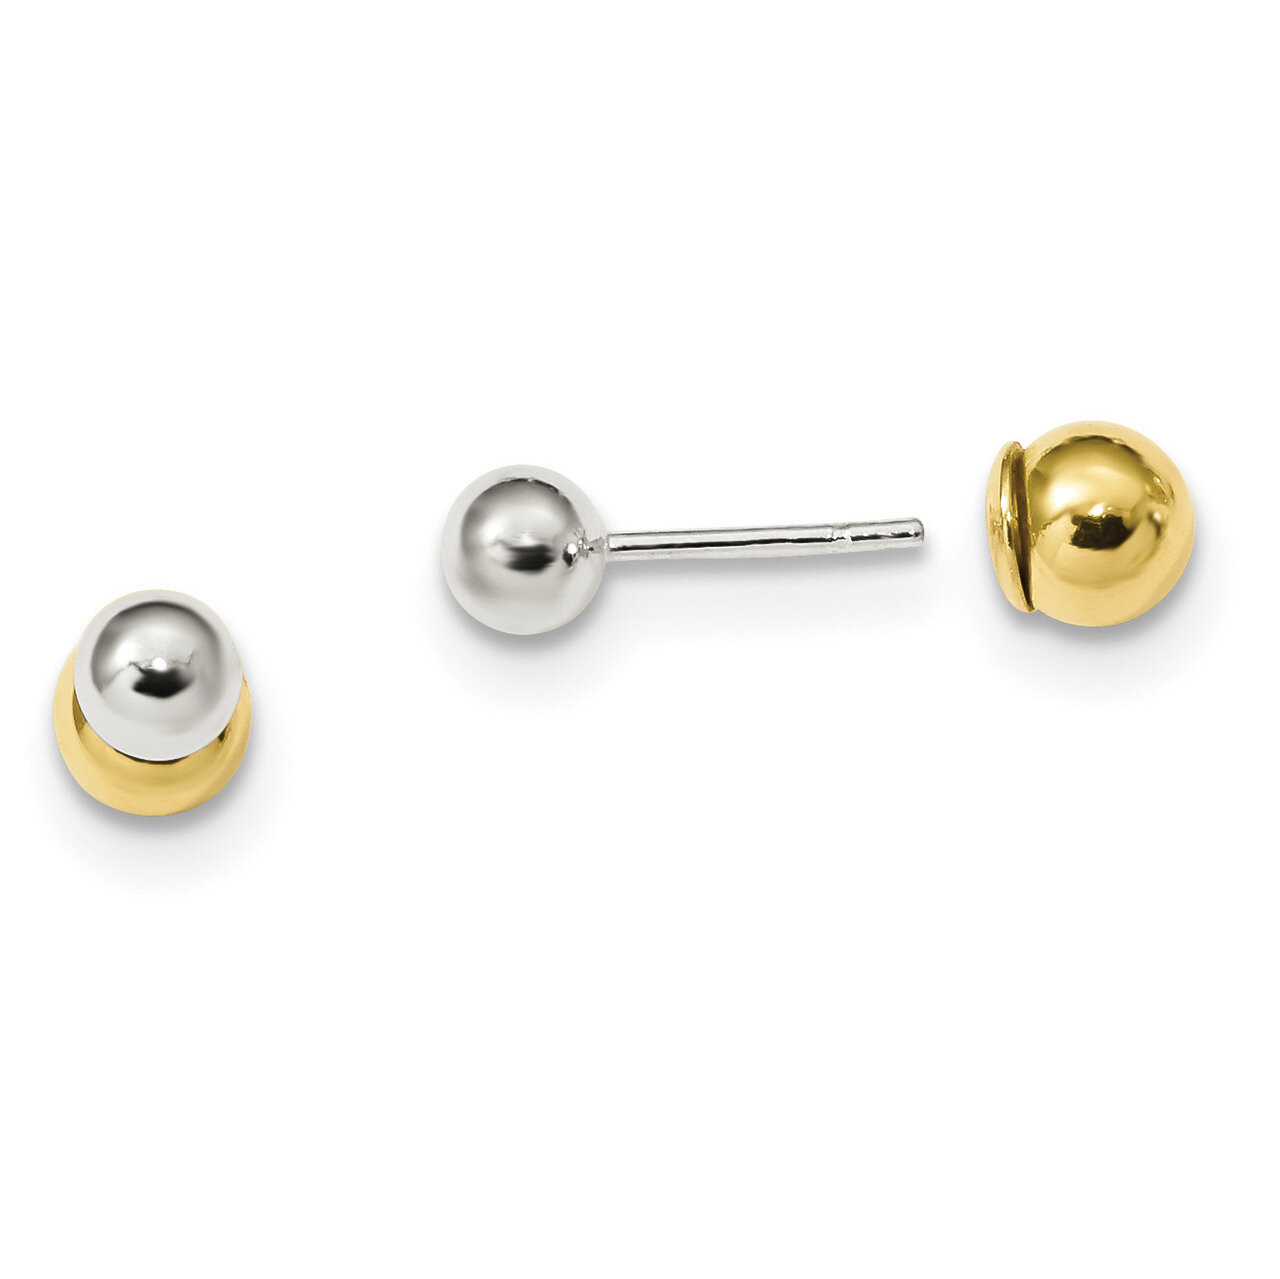 5mm-6mm Ball Front Back Post Earrings Sterling Silver Gold-tone QE13339